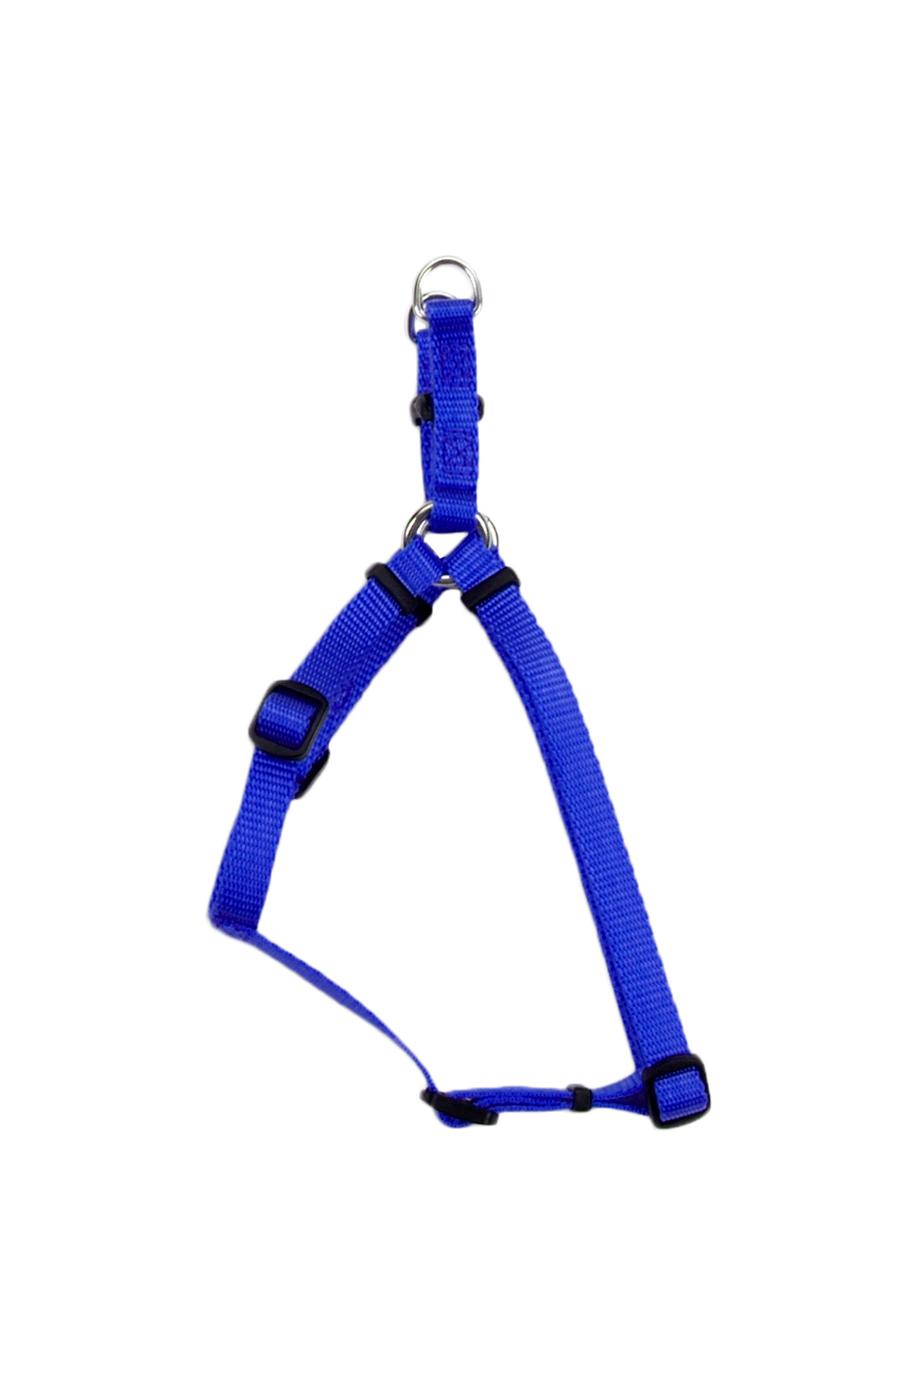 Coastal Pet Products Blue, Black or Red 3/8 inch Comfort Wrap Harness, Assorted Colors; image 3 of 4